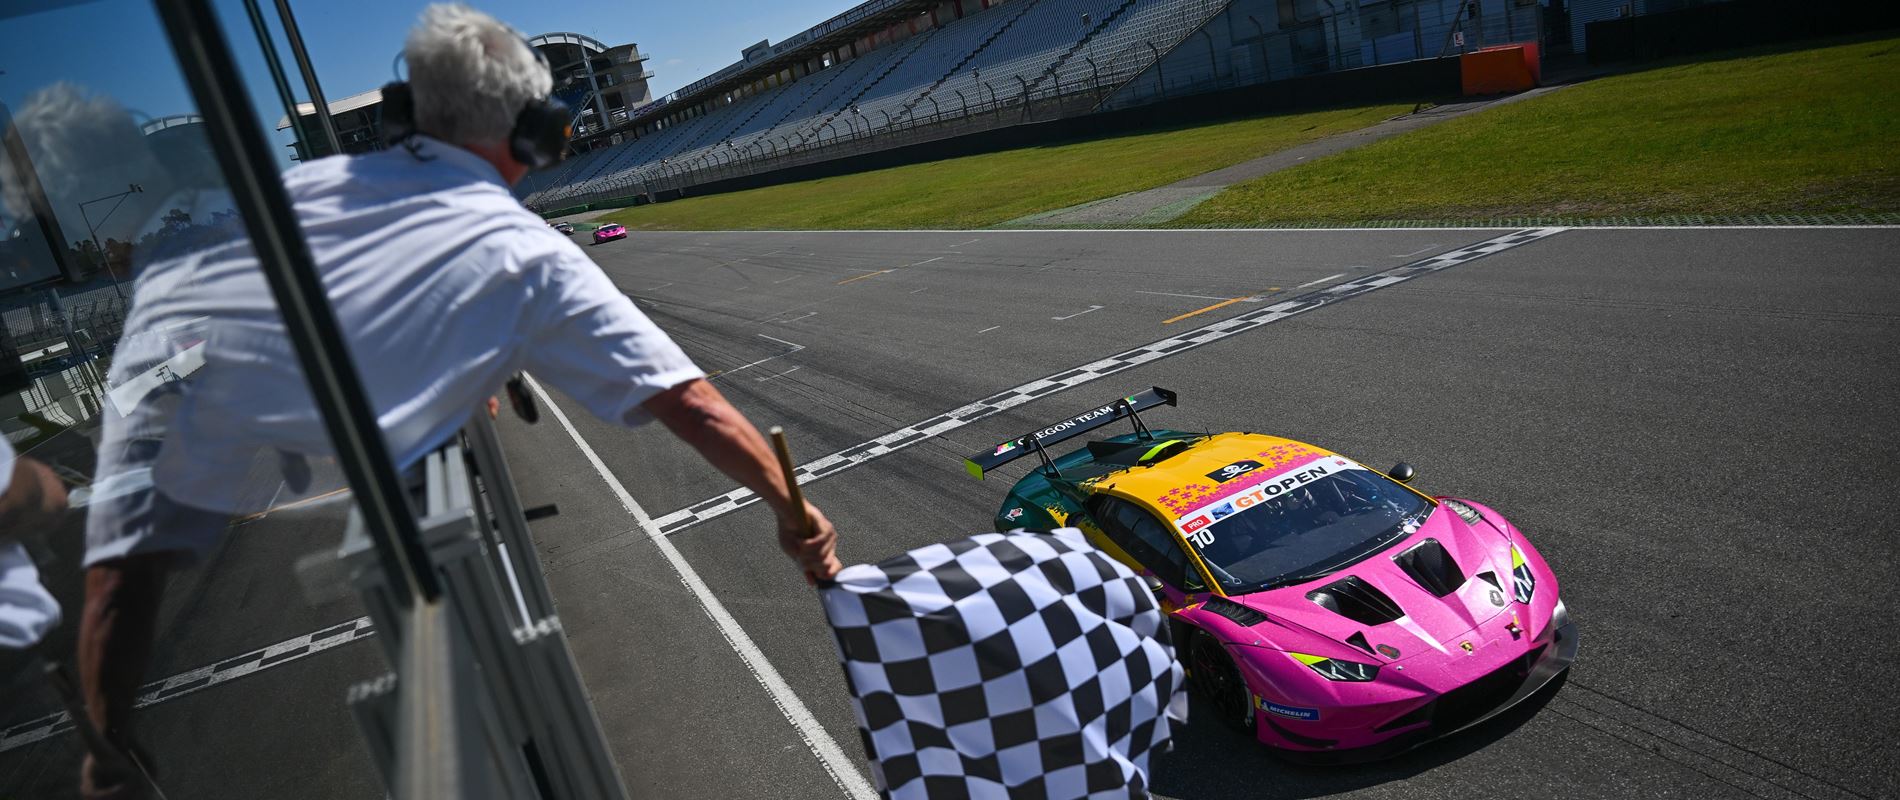 lamborghini-takes-first-international-gt-open-victory-of-the-year-at-hockenheim